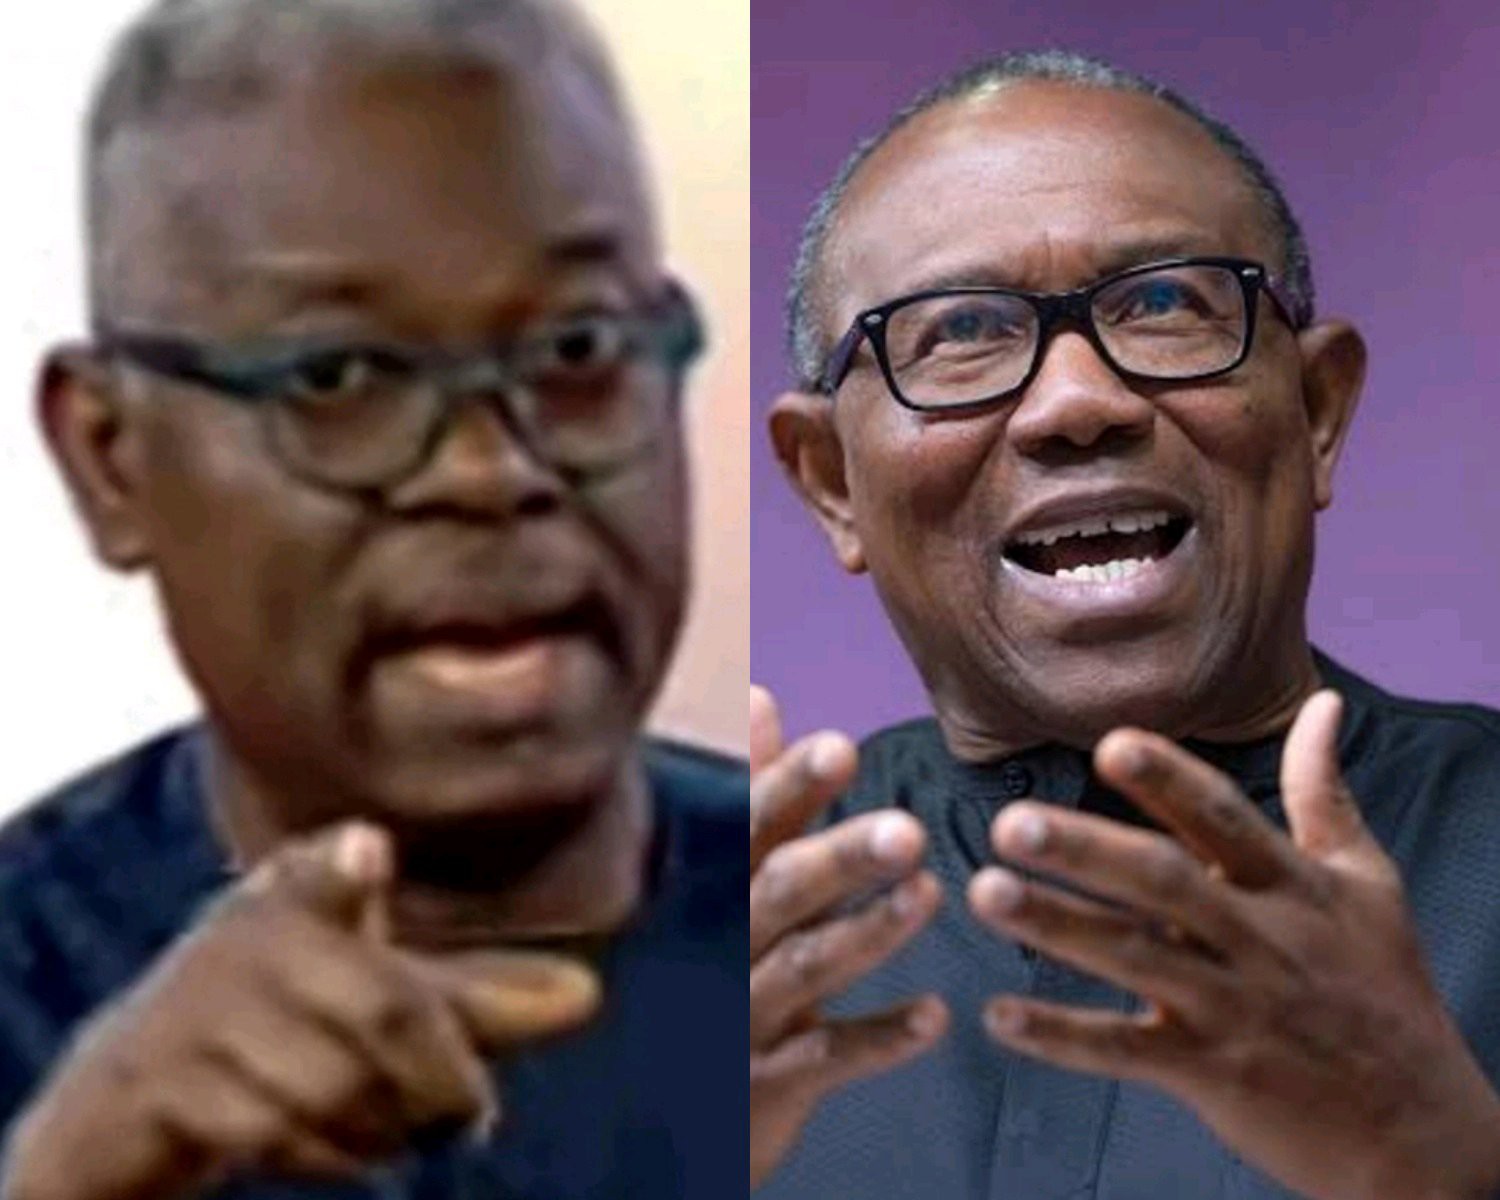 According to Osuntokun, Peter Obi assisted LP supporters in Lagos who were attacked and one whose hand was cut